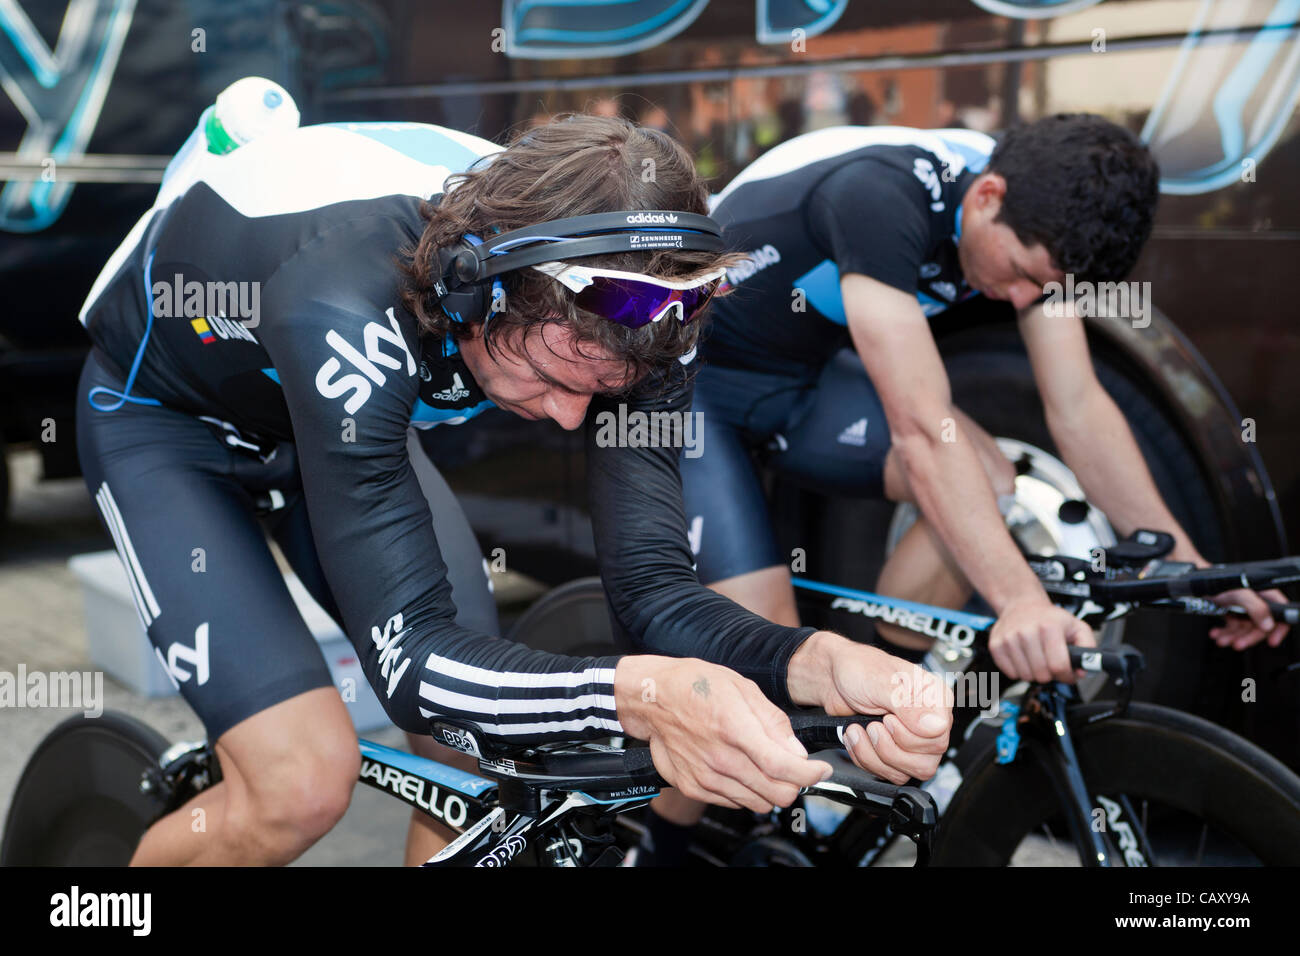 HERNING, Denmark - Saturday, May 5th, 2012: Sky Procycling riders Rigoberto Uran Uran (left) from Colombia and Peter Kennaugh (right)from Great Brittan is warming up before the their first race in this year Giro d'Italia. Stock Photo